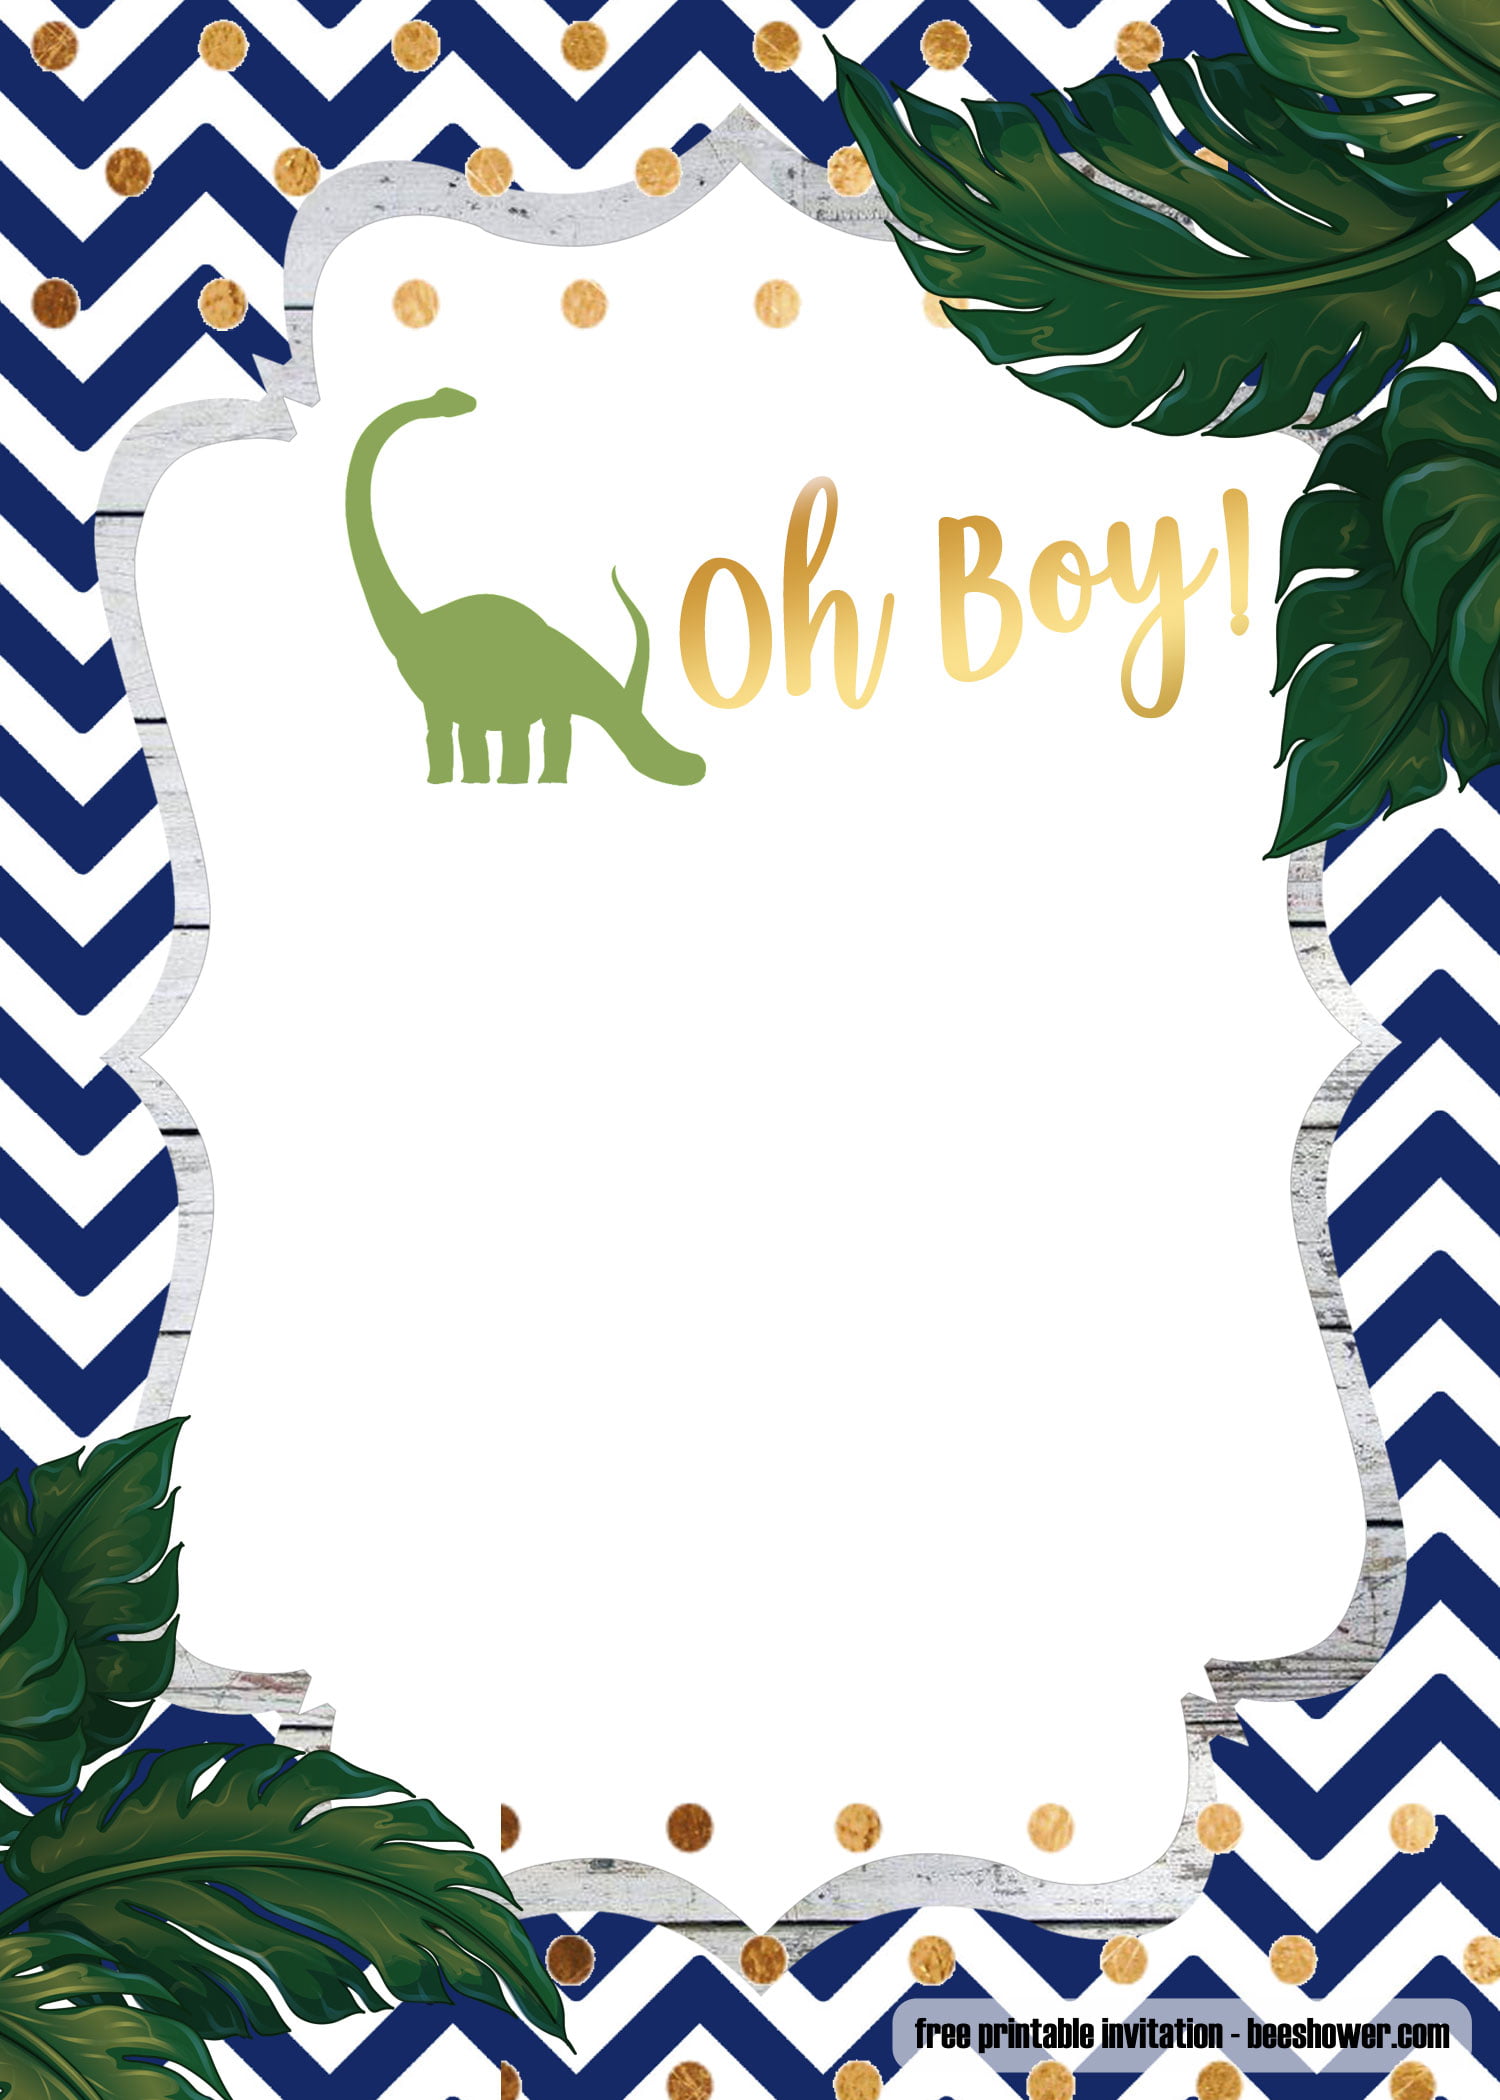 A Dinosaur Template For Your Baby Shower Invitation Download Hundreds FREE PRINTABLE Birthday